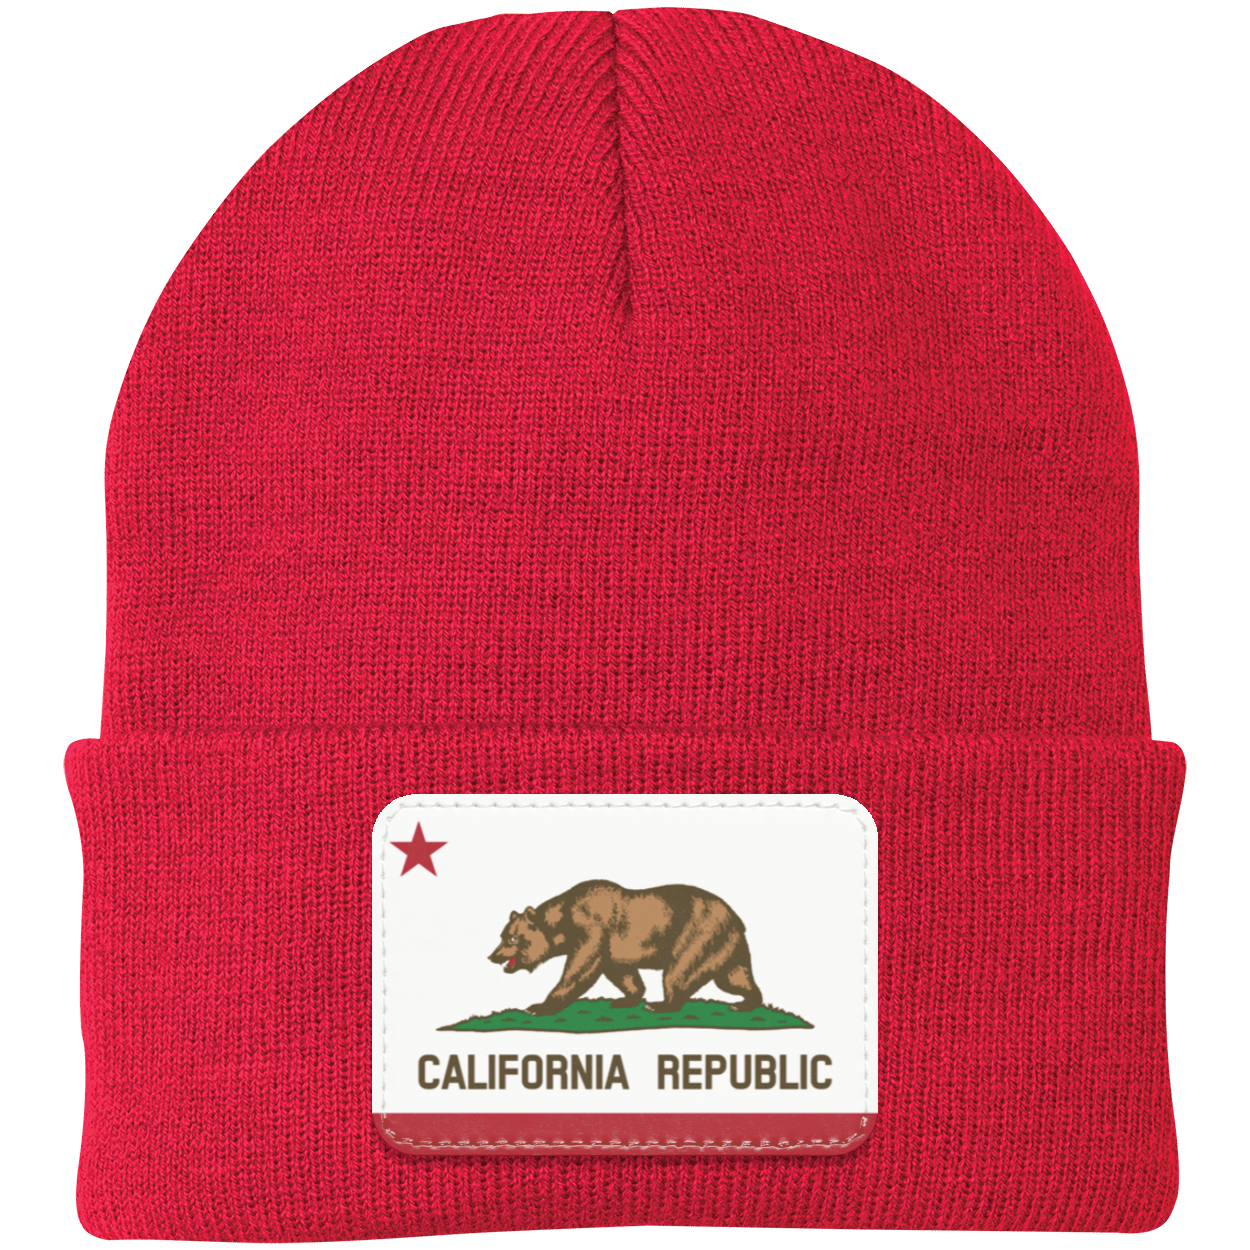 California State Flag - United States of America Knit Cap - Patch